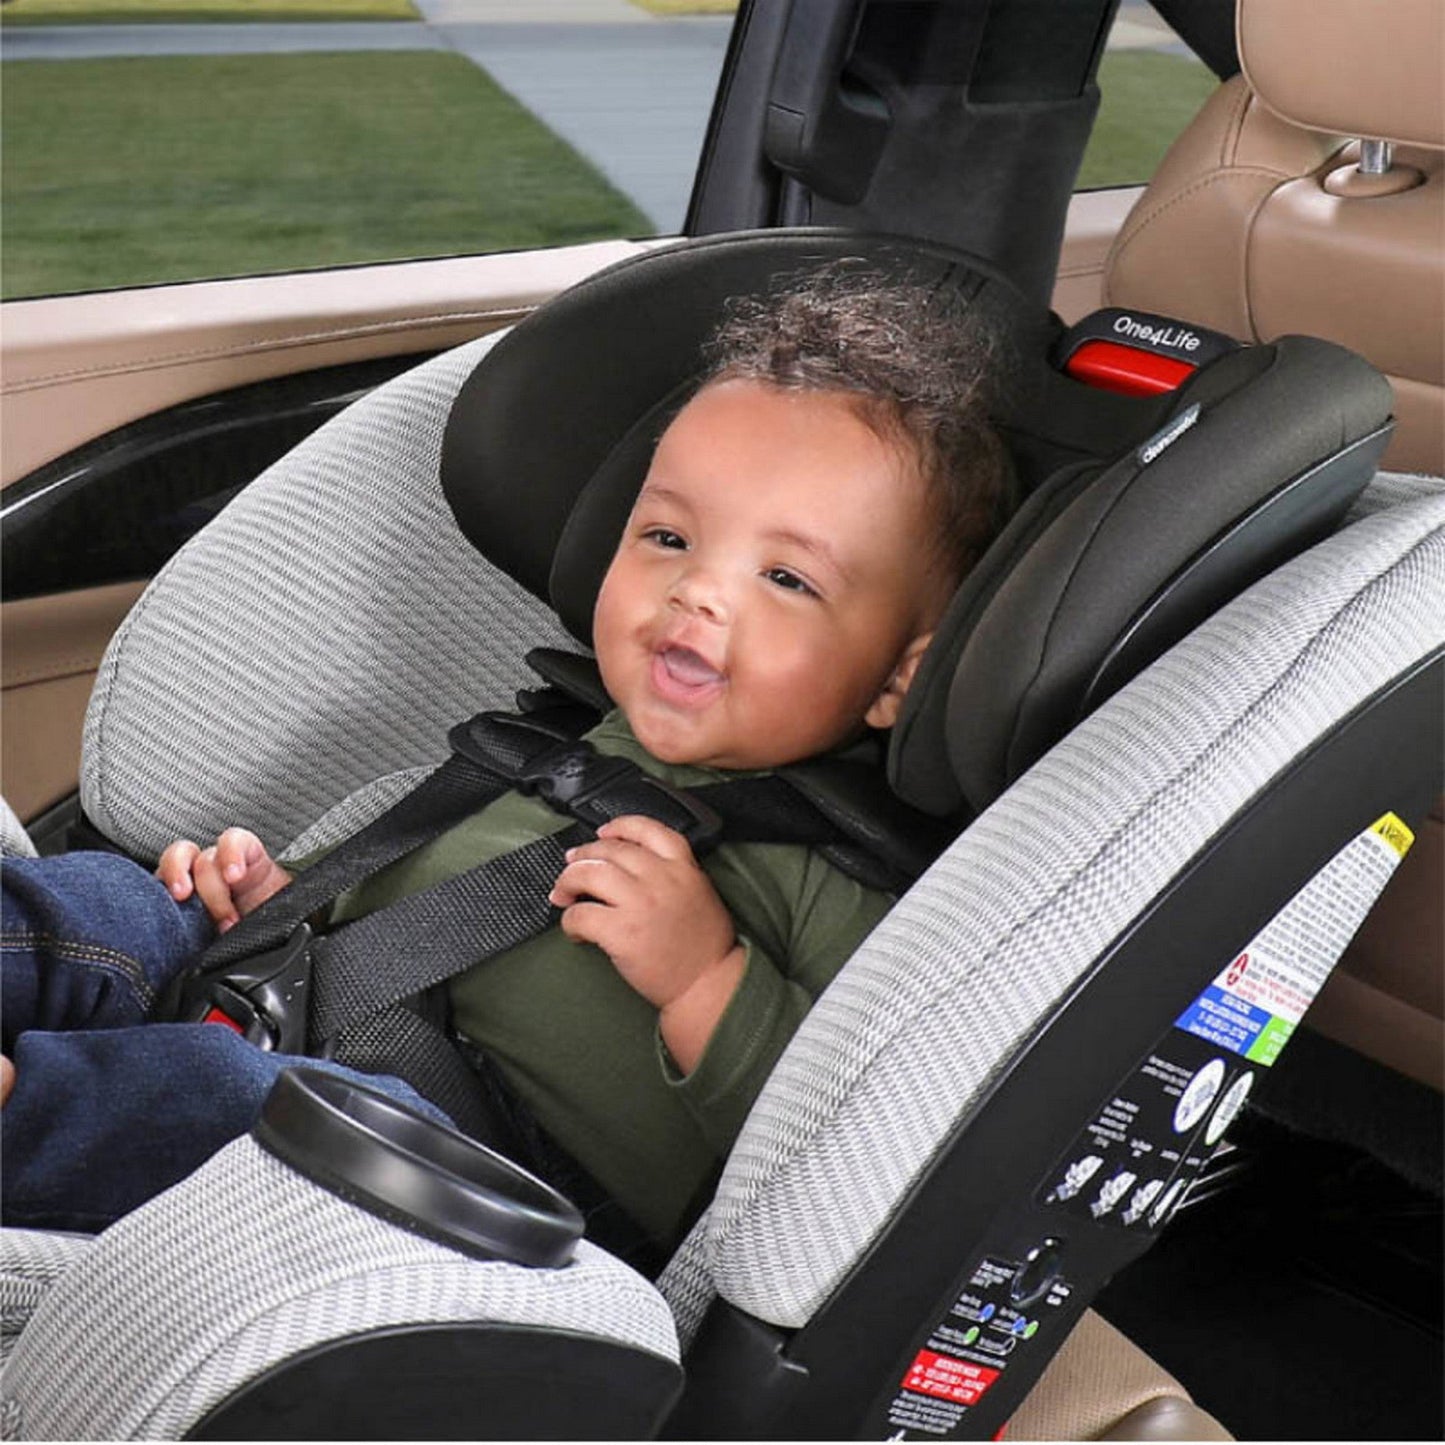 BRITAX One4Life All-In-One Car Seat